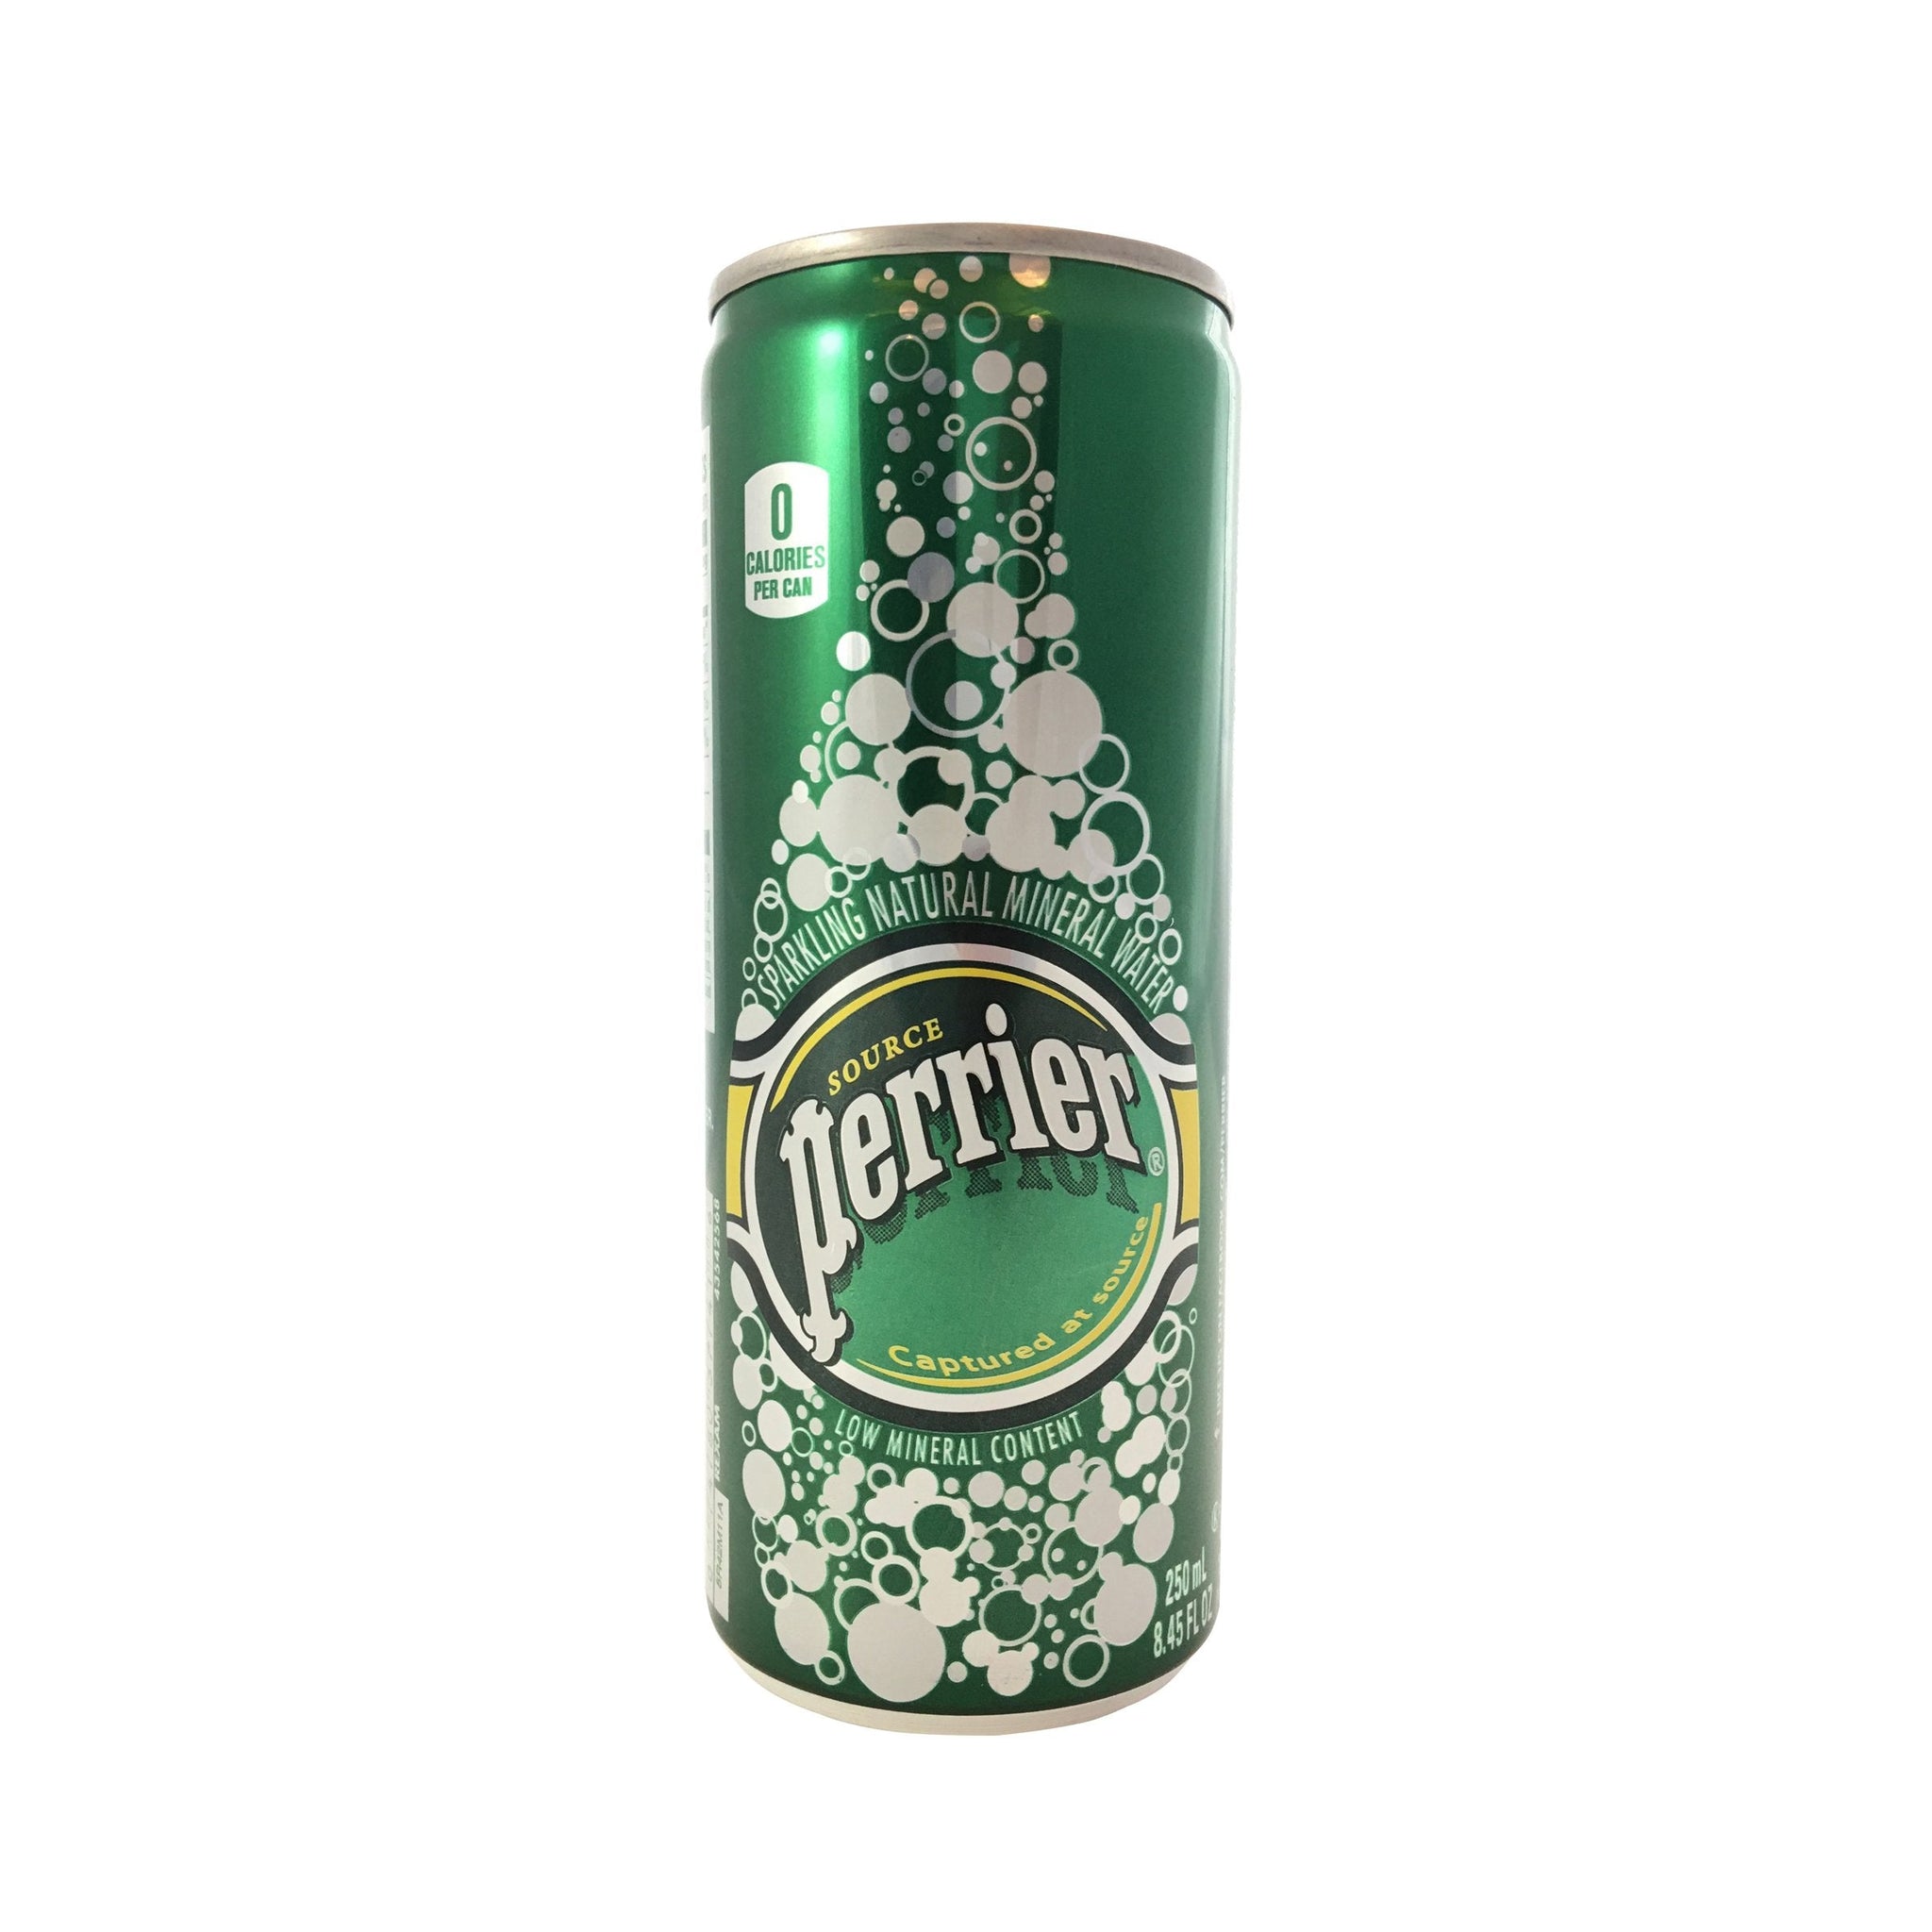 bvi>Perrier Sparkling Water Original - 330 ml cans, 24 pack